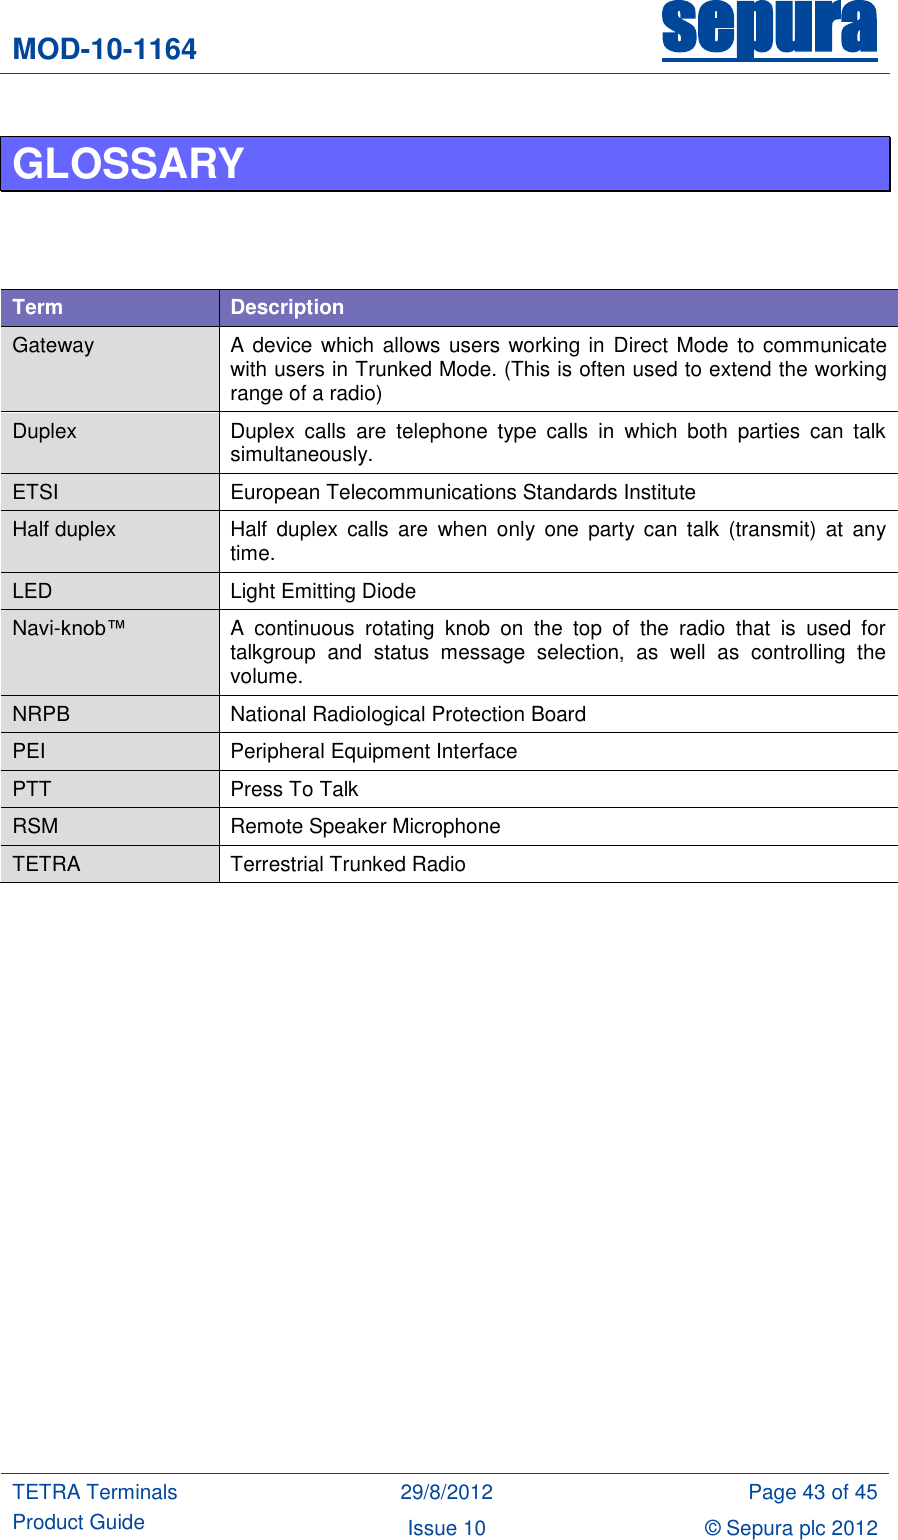 MOD-10-1164 sepura  TETRA Terminals Product Guide 29/8/2012 Page 43 of 45 Issue 10 © Sepura plc 2012   GLOSSARY     Term Description Gateway A device  which  allows users working in Direct Mode  to communicate with users in Trunked Mode. (This is often used to extend the working range of a radio) Duplex Duplex  calls  are  telephone  type  calls  in  which  both  parties  can  talk simultaneously.  ETSI European Telecommunications Standards Institute Half duplex Half  duplex  calls  are  when  only  one  party  can  talk  (transmit) at  any time. LED Light Emitting Diode Navi-knob™  A  continuous  rotating  knob  on  the  top  of  the  radio  that  is  used  for talkgroup  and  status  message  selection,  as  well  as  controlling  the volume. NRPB National Radiological Protection Board PEI Peripheral Equipment Interface PTT Press To Talk RSM Remote Speaker Microphone TETRA Terrestrial Trunked Radio     